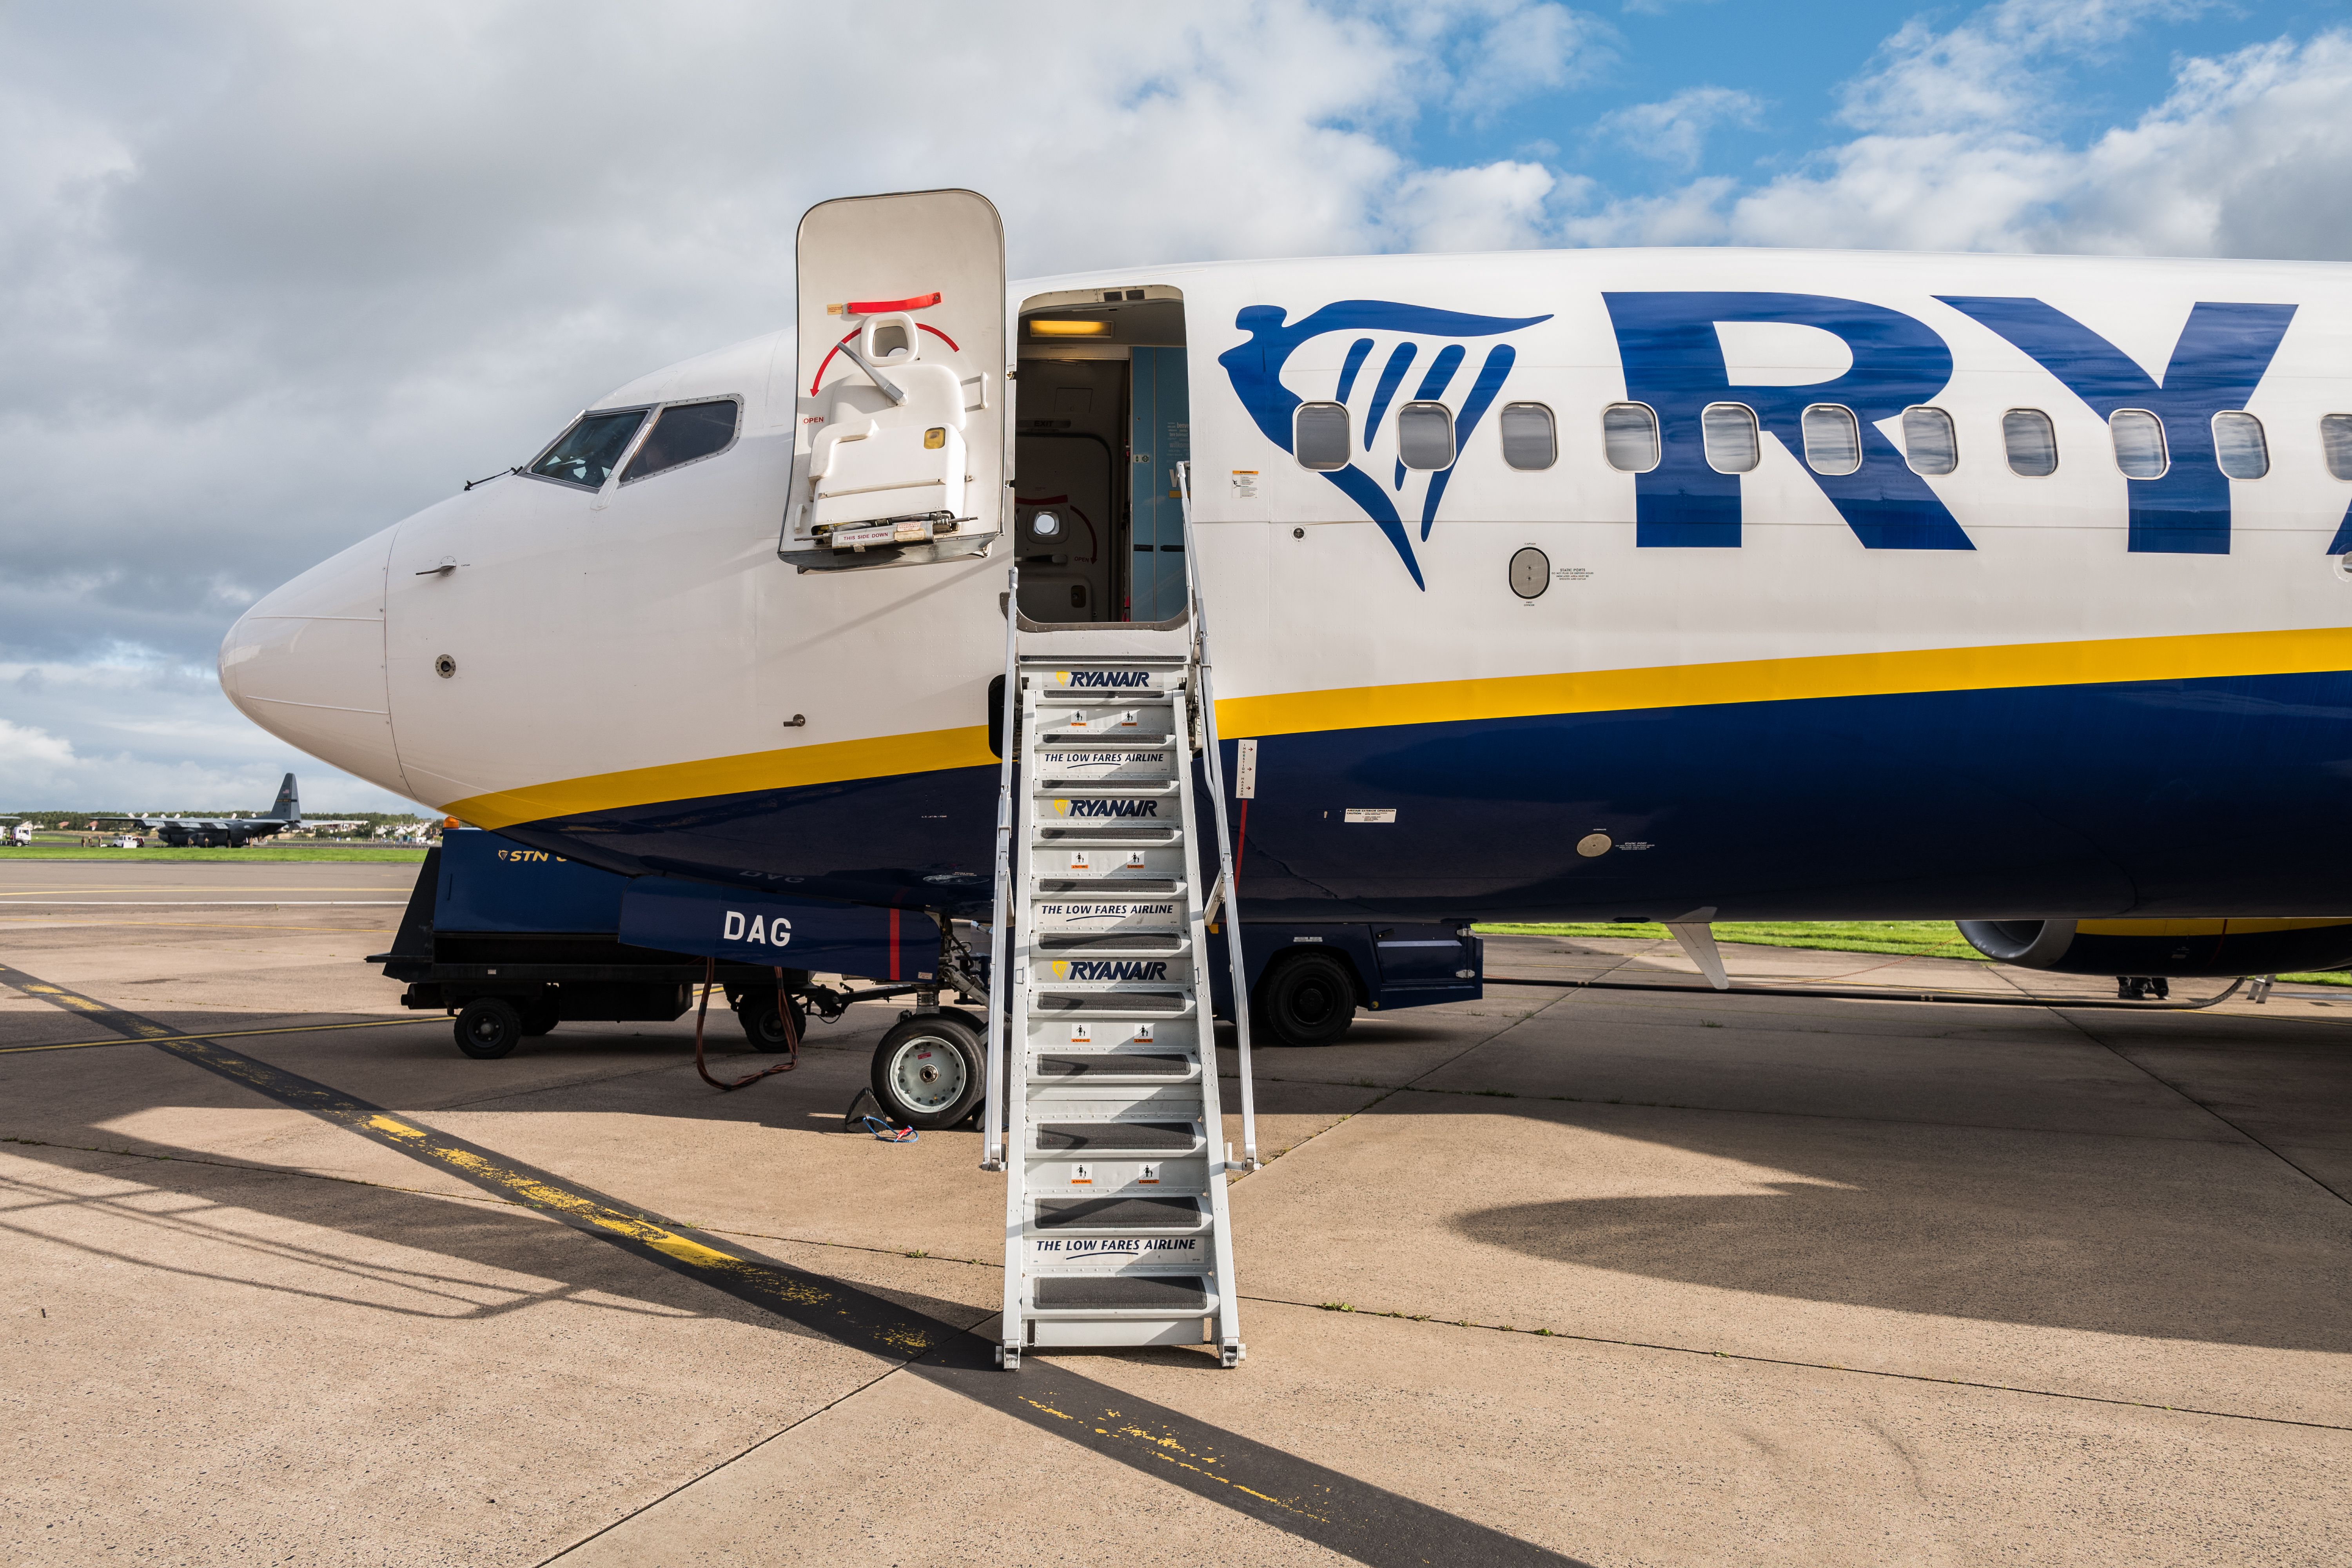 A Ryanair aircraft parked at an airport with its main door stairs down.